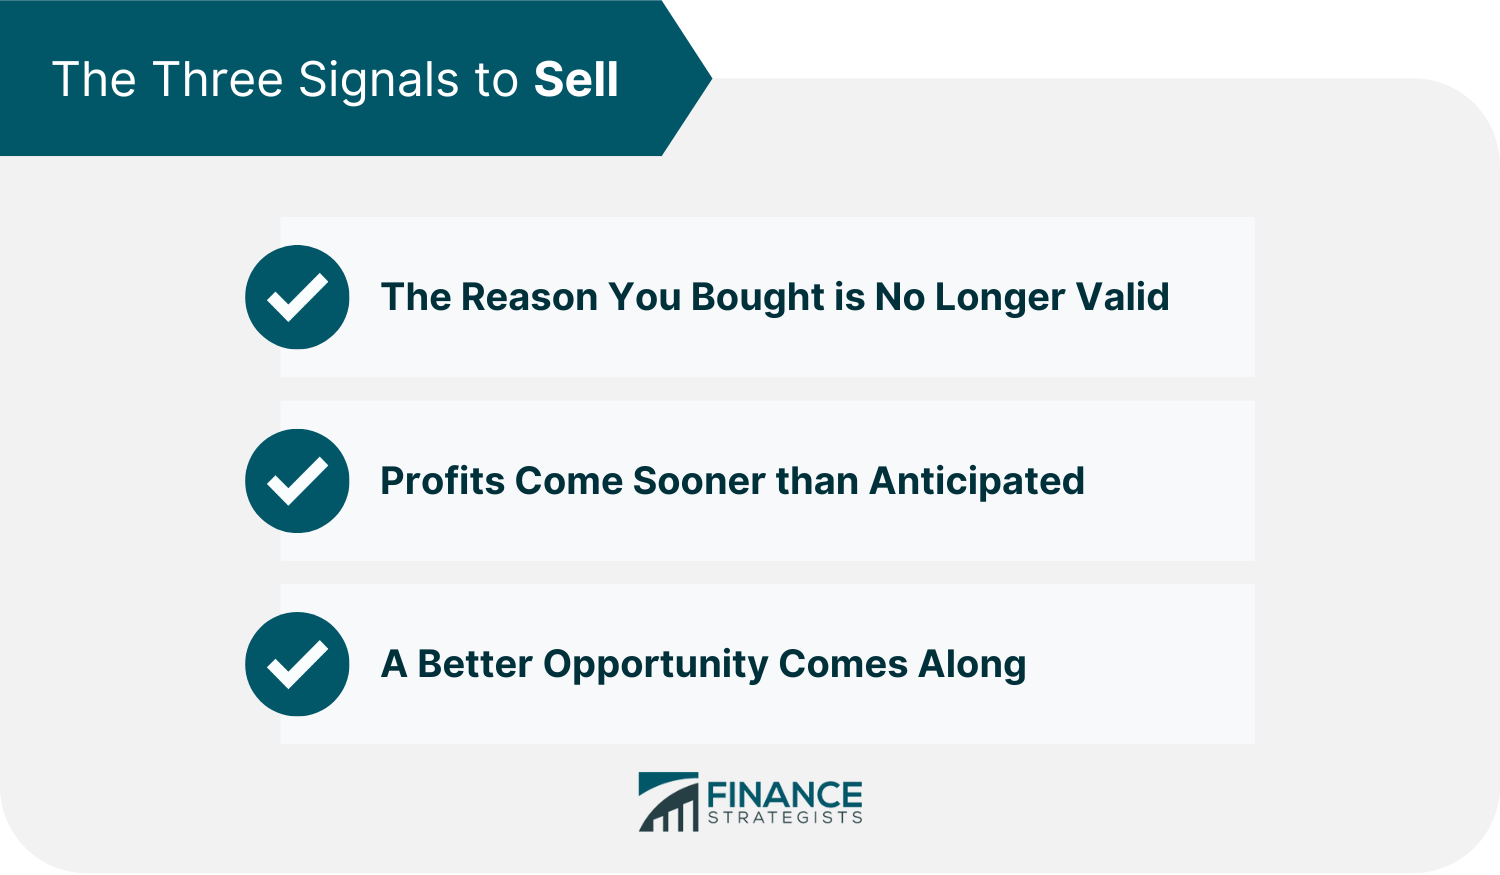 The Three Signals to Sell